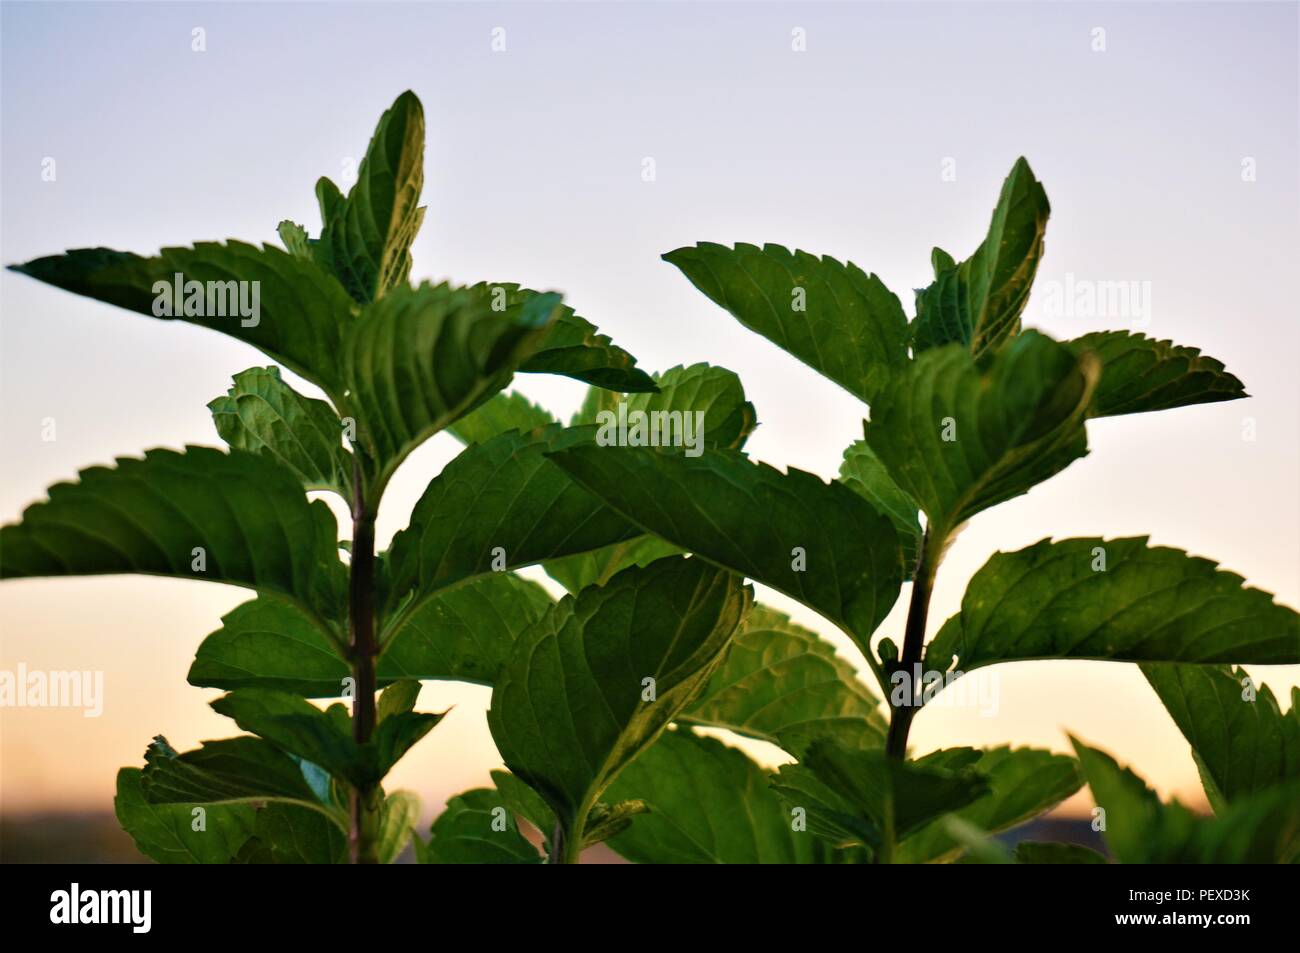 Mint leaves during a sunset Stock Photo